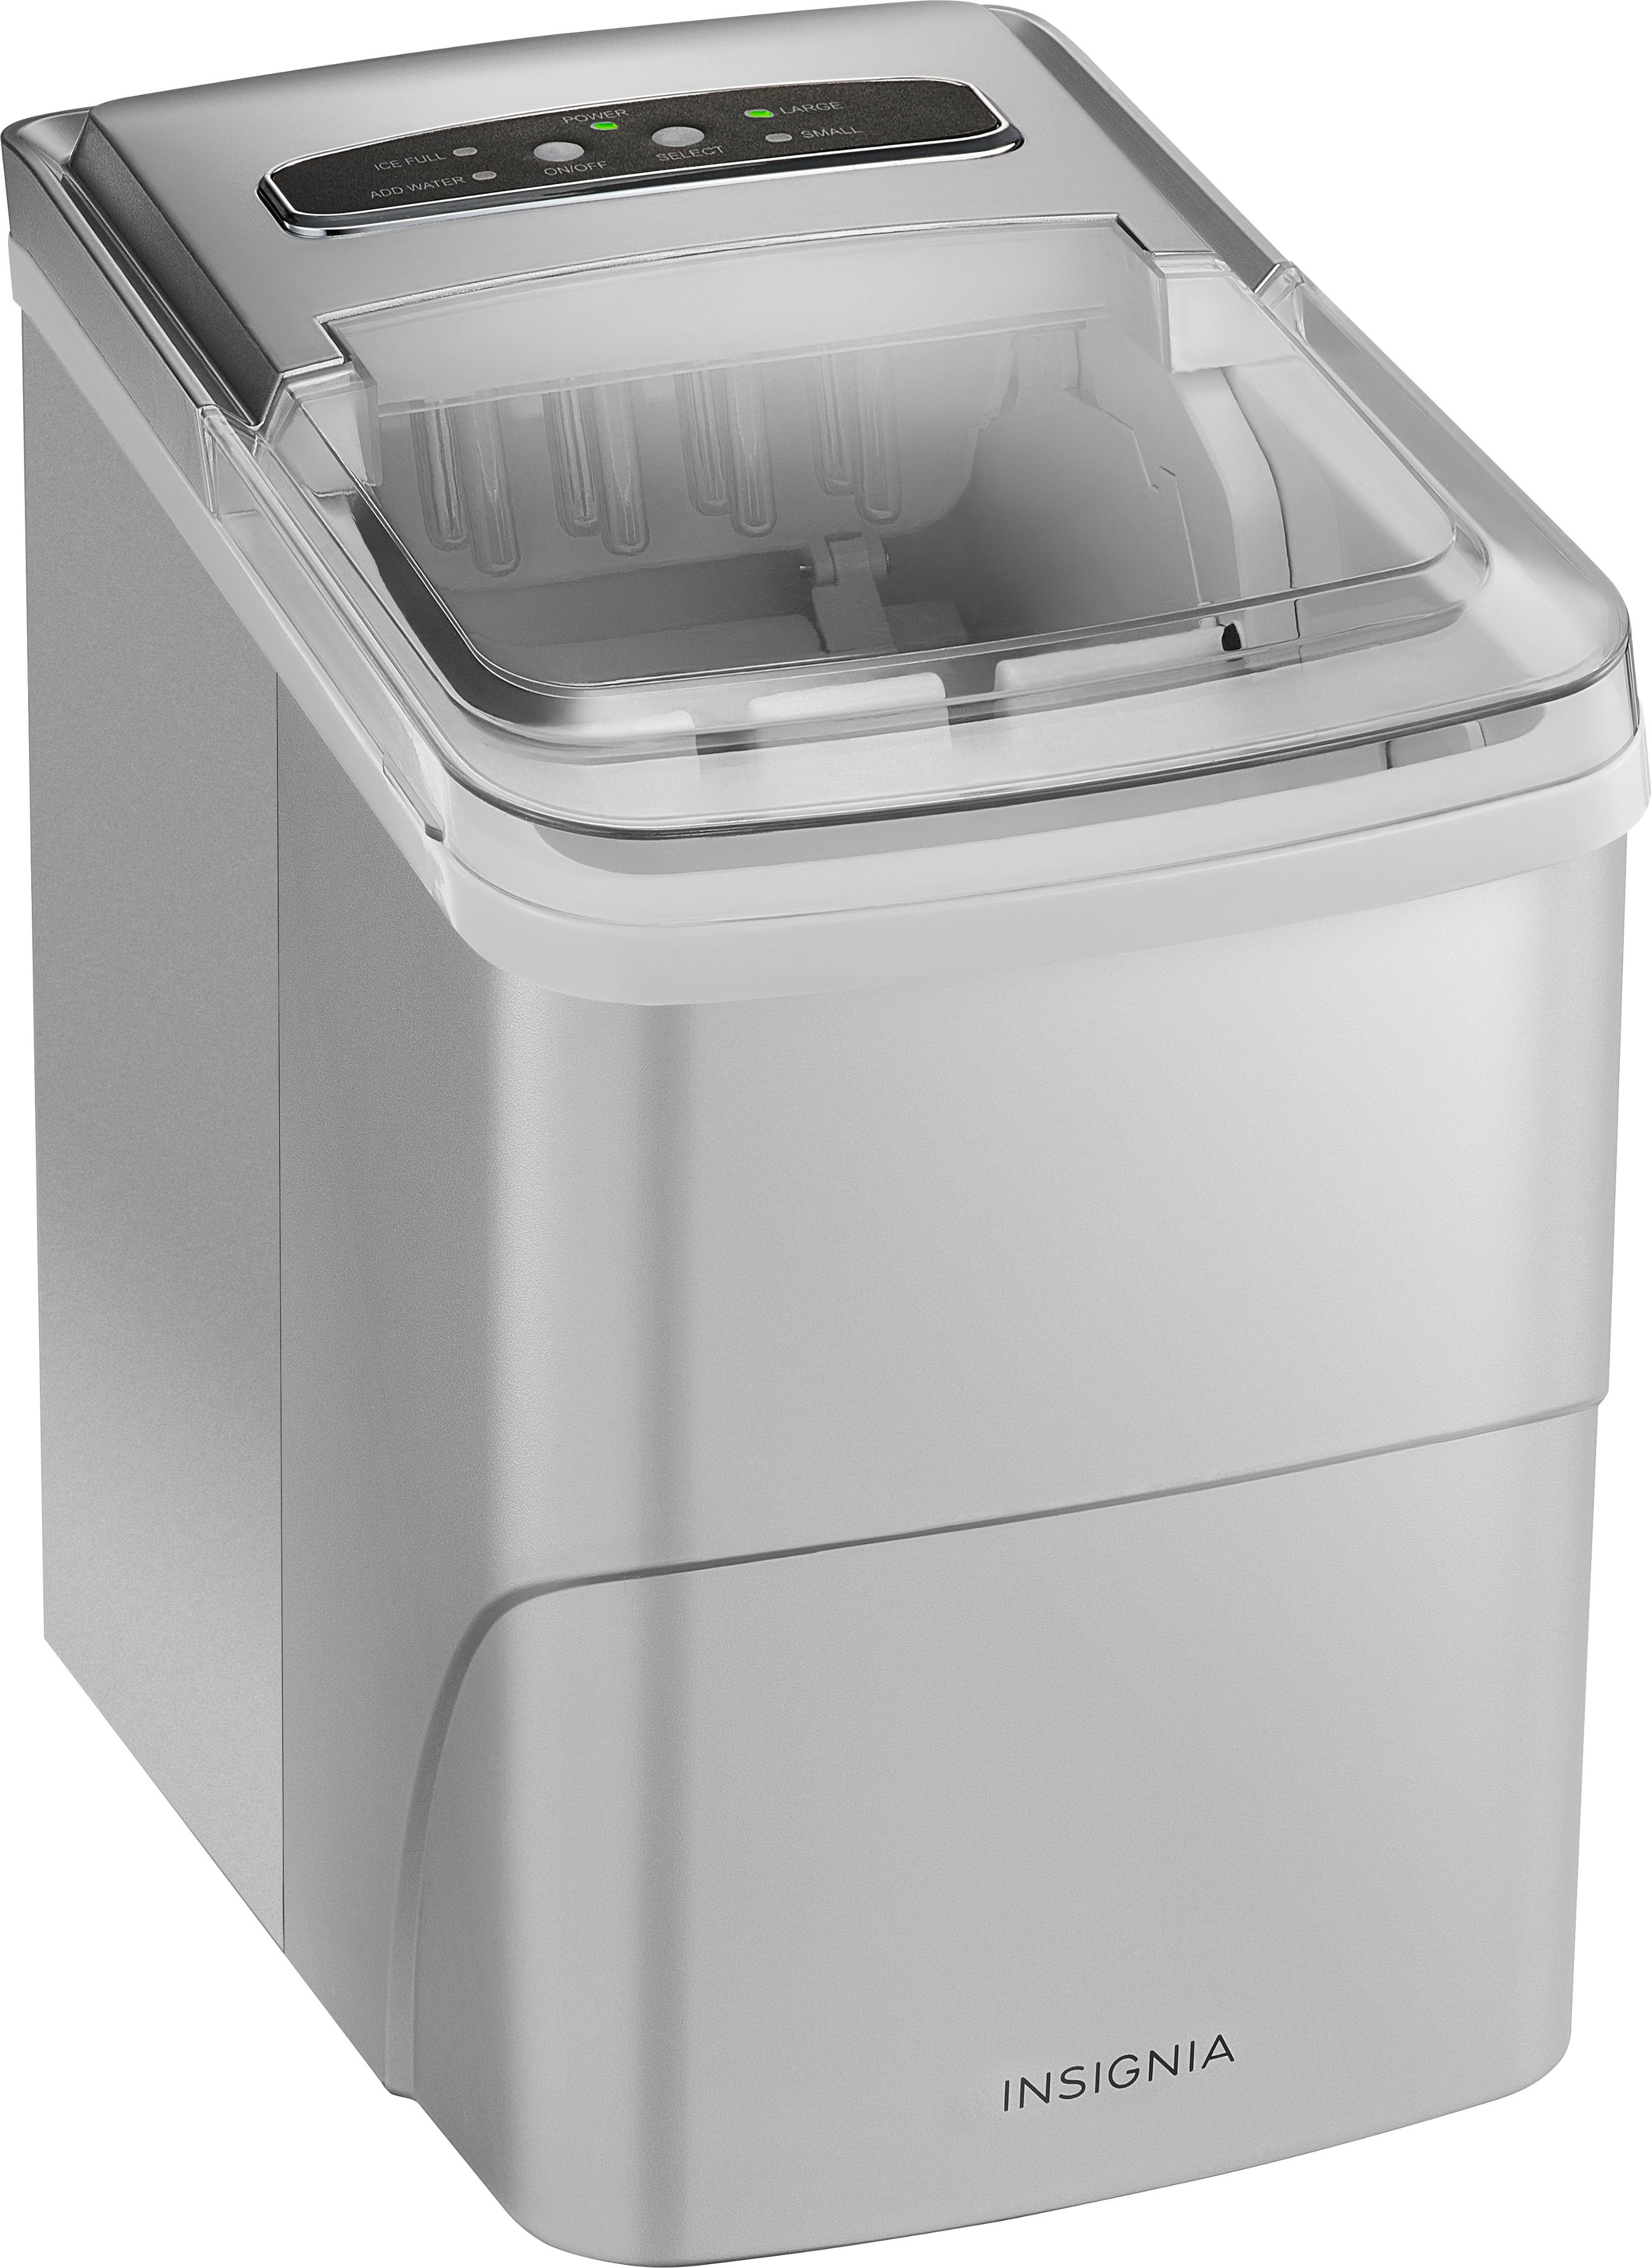 Angle View: Insignia™ - Portable Ice Maker with Auto Shut-Off - Mint